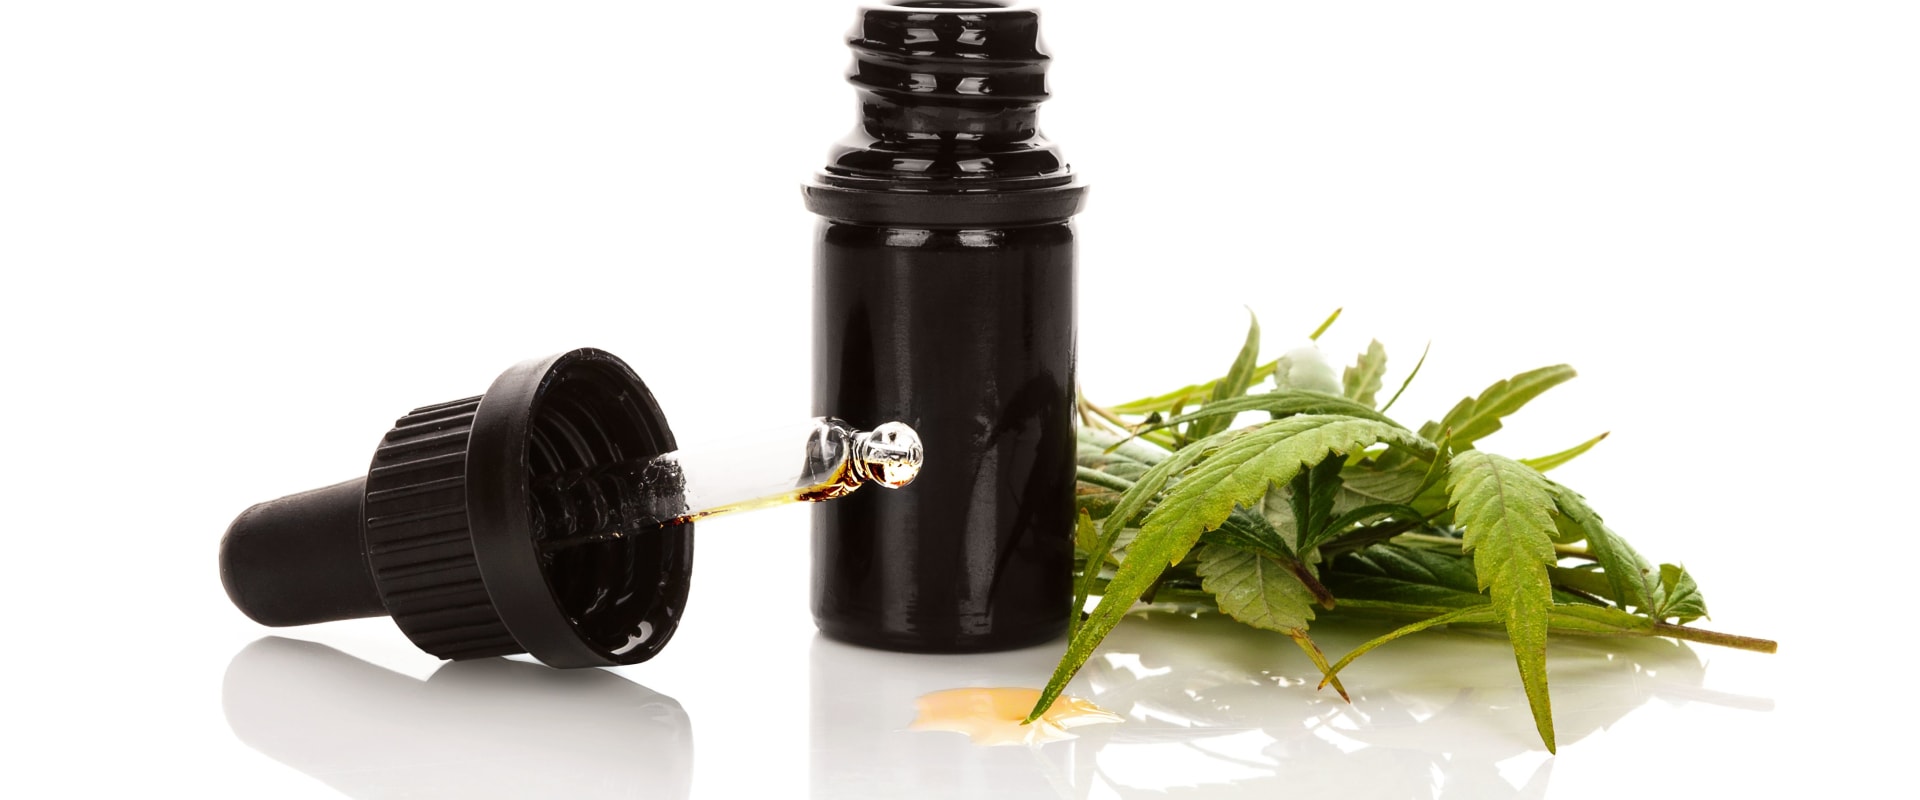 How much cbd oil should i take for recovery?